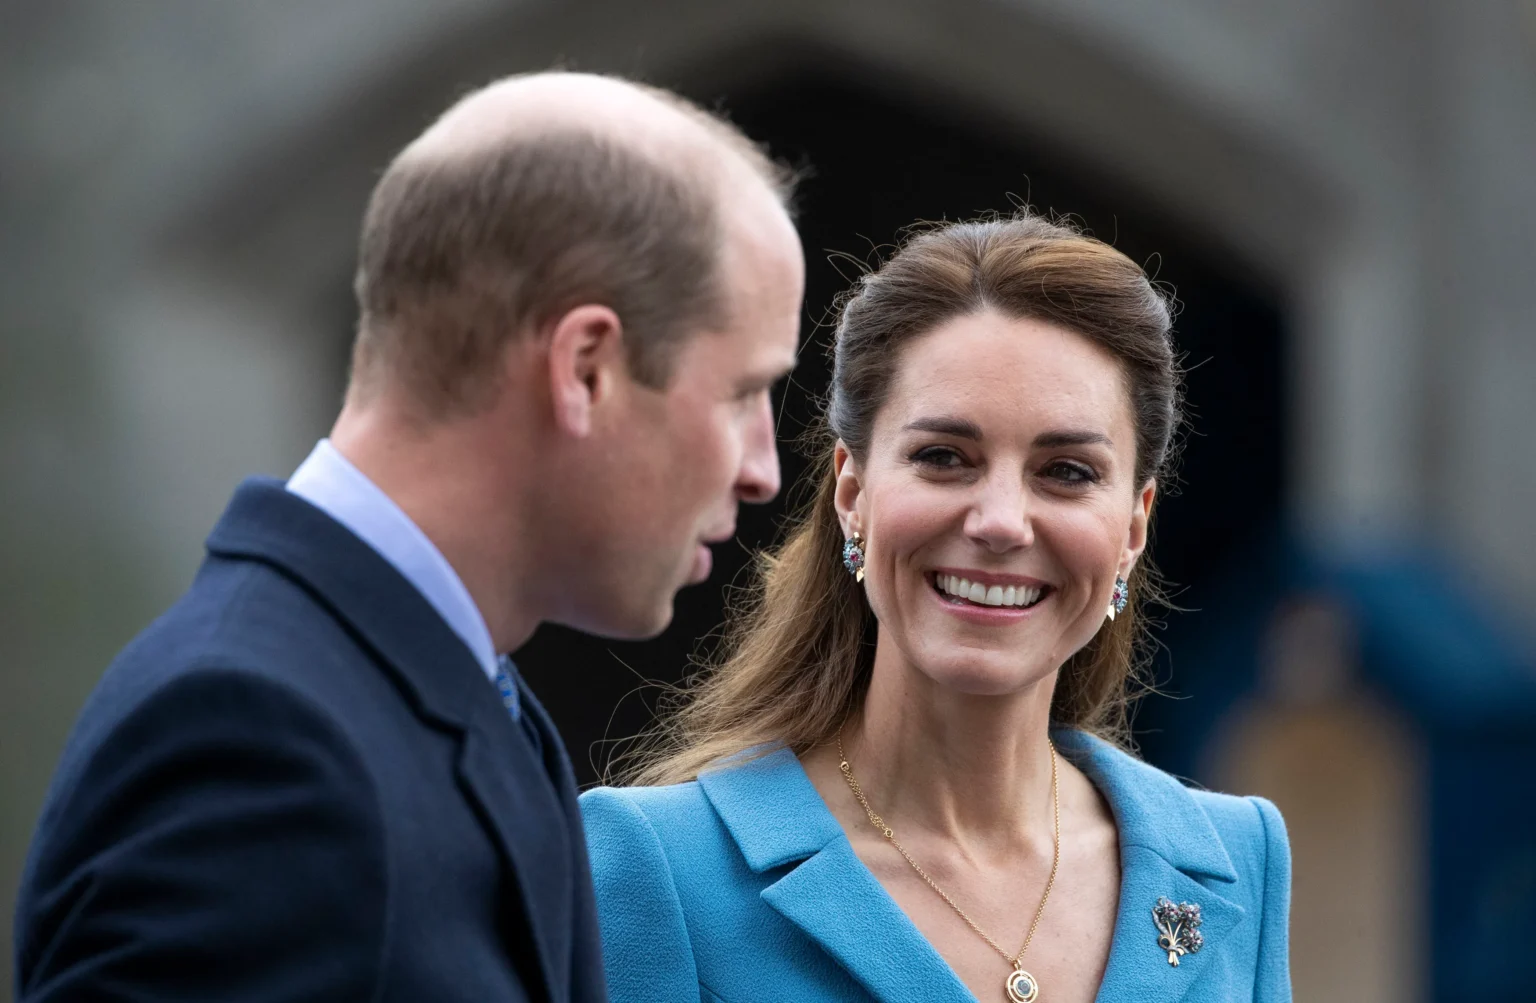 kate-middletons-health-update-sparks-fury-reactions-as-royal-fans-ask-palace-to-release-photo